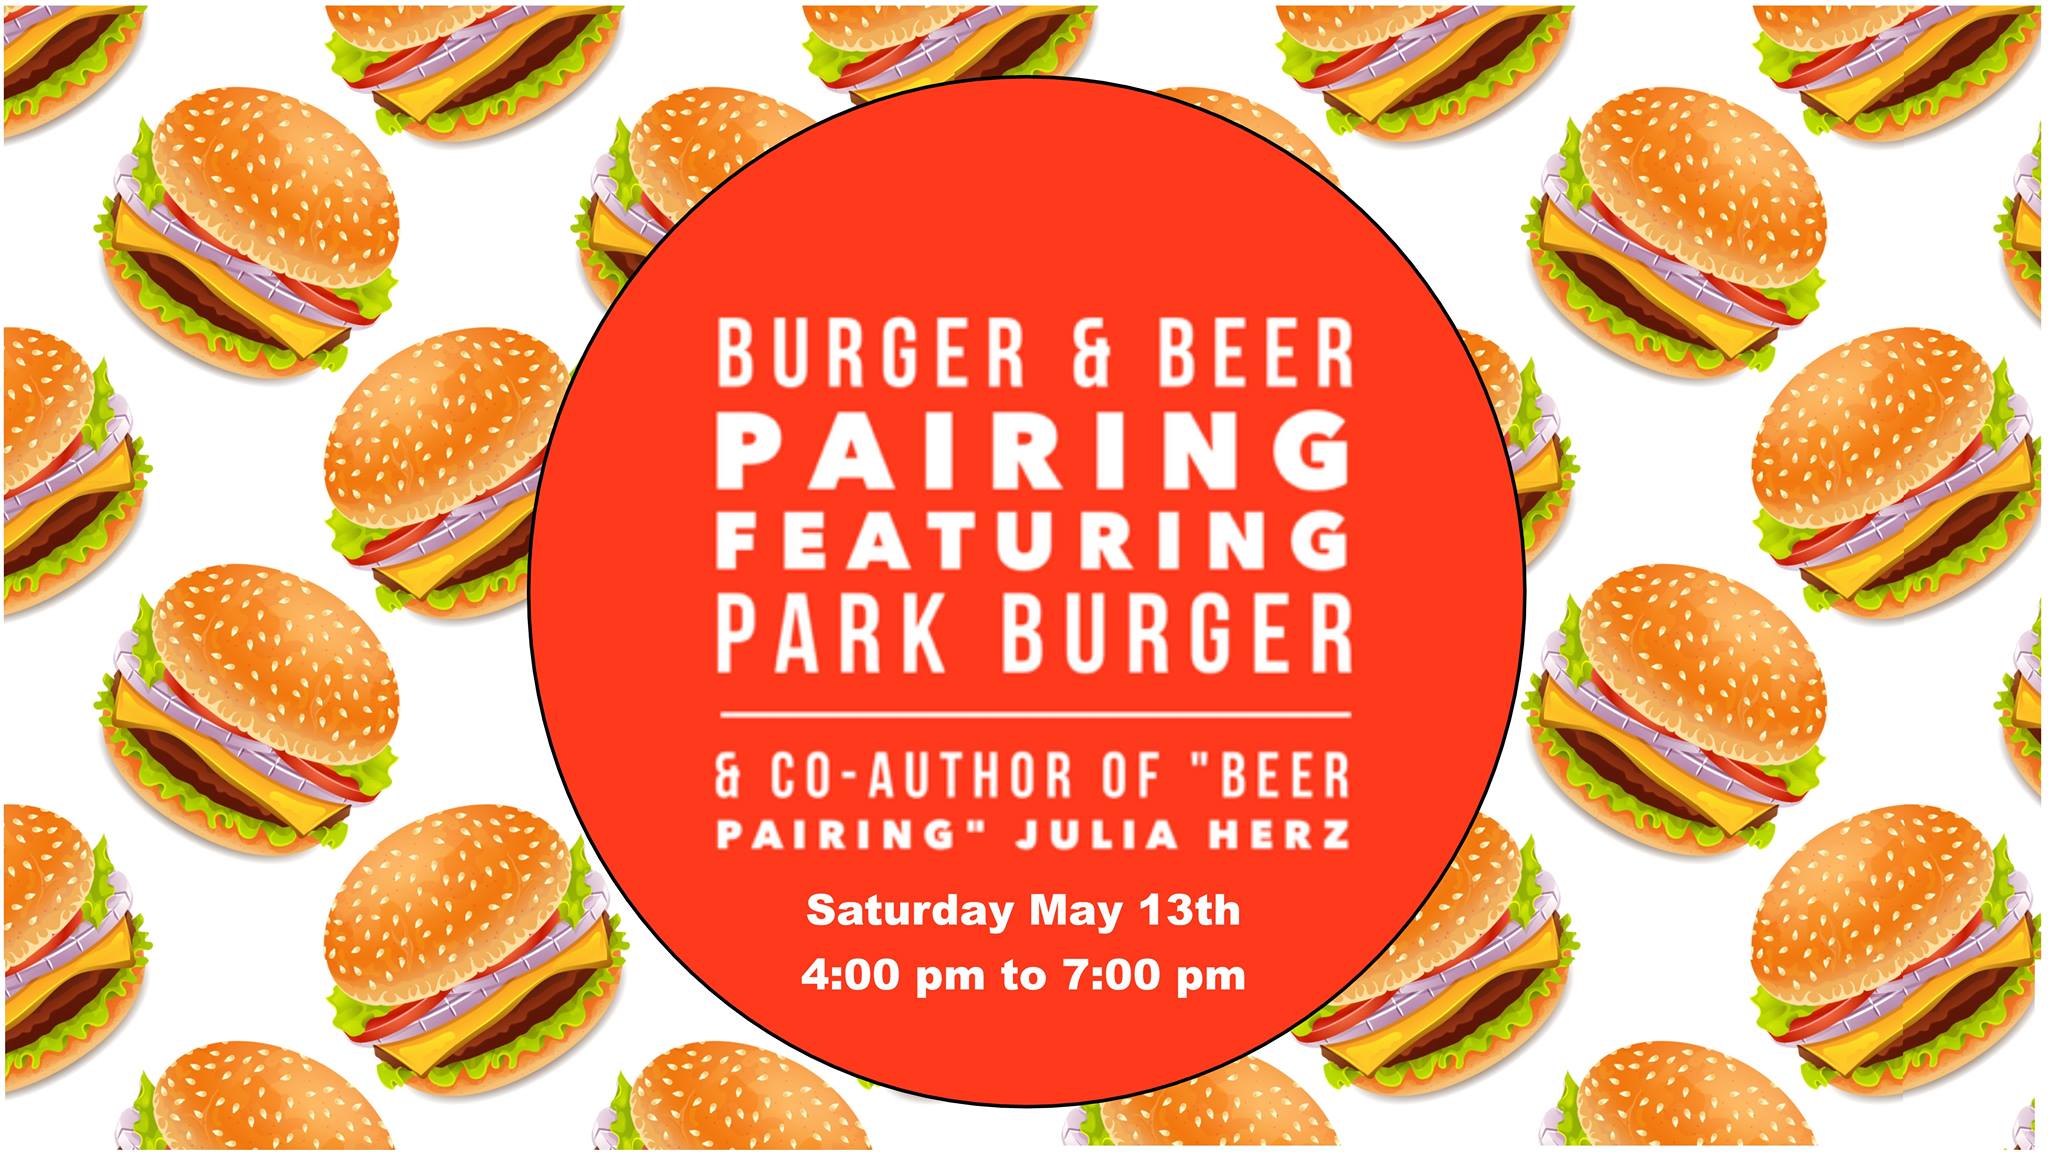 Fiction Burger and Beer Pairing